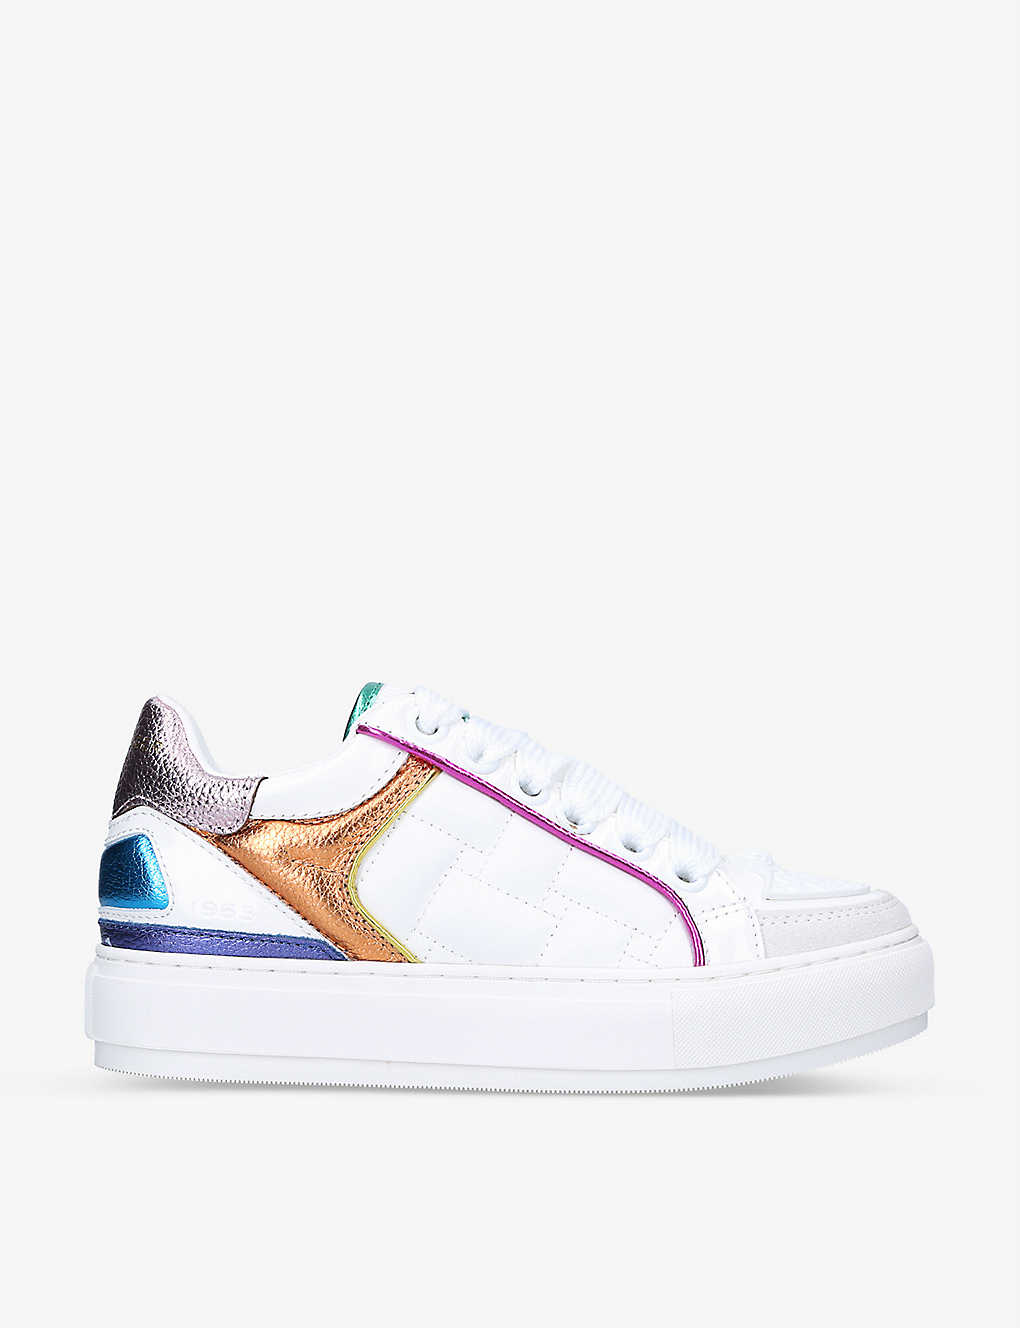 Shop Kurt Geiger London Women's Mult/other Southbank Panelled Leather Trainers